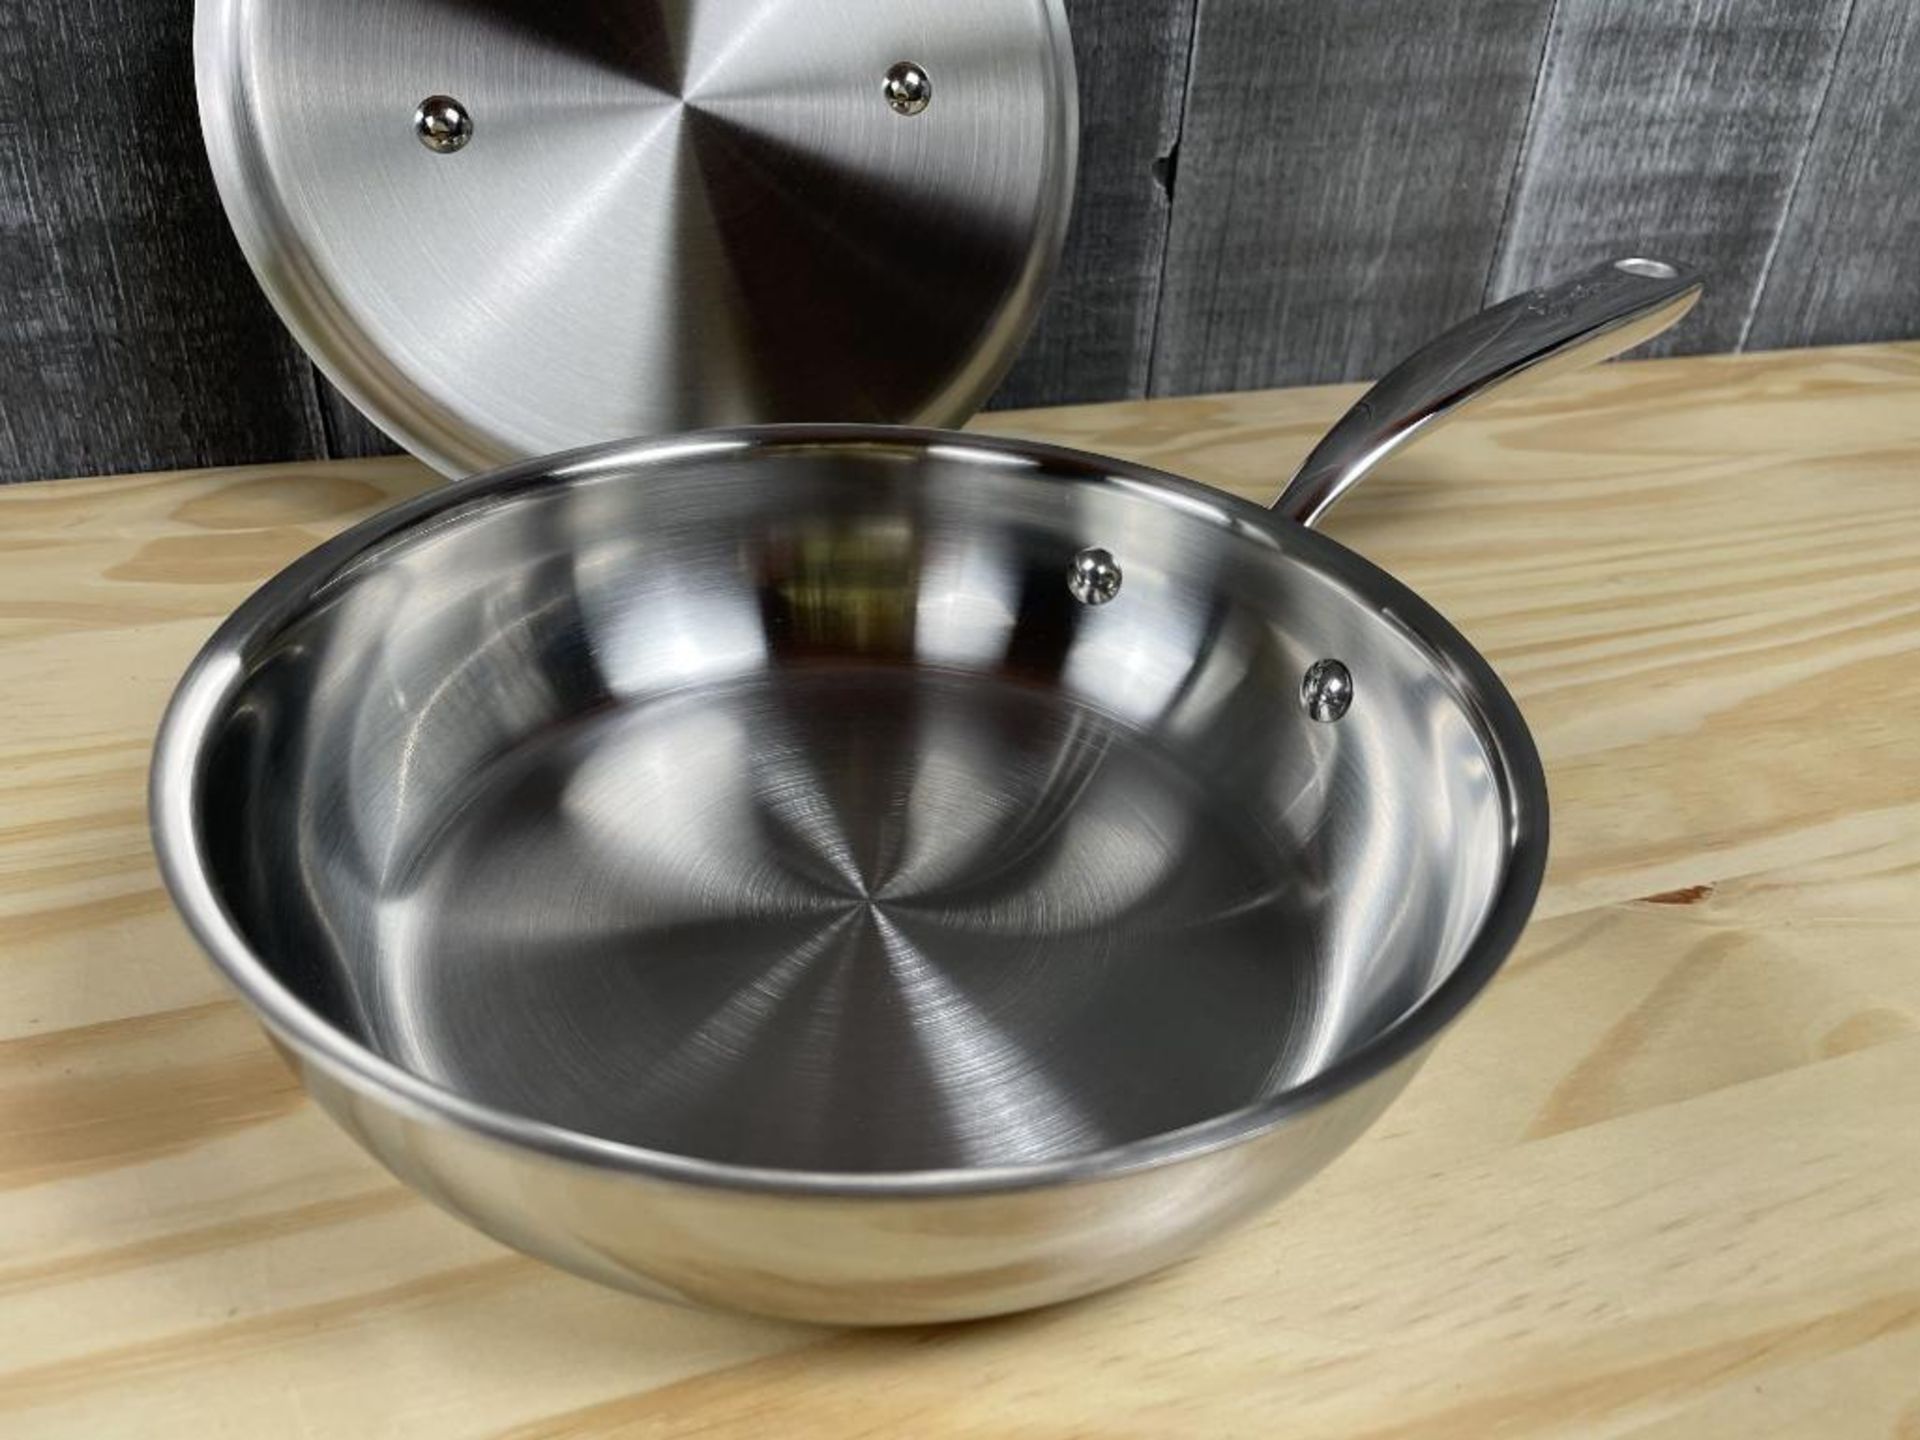 LAGOSTINA 3-PLY STAINLESS STEEL CLAD 7" SKILLET WITH COVER